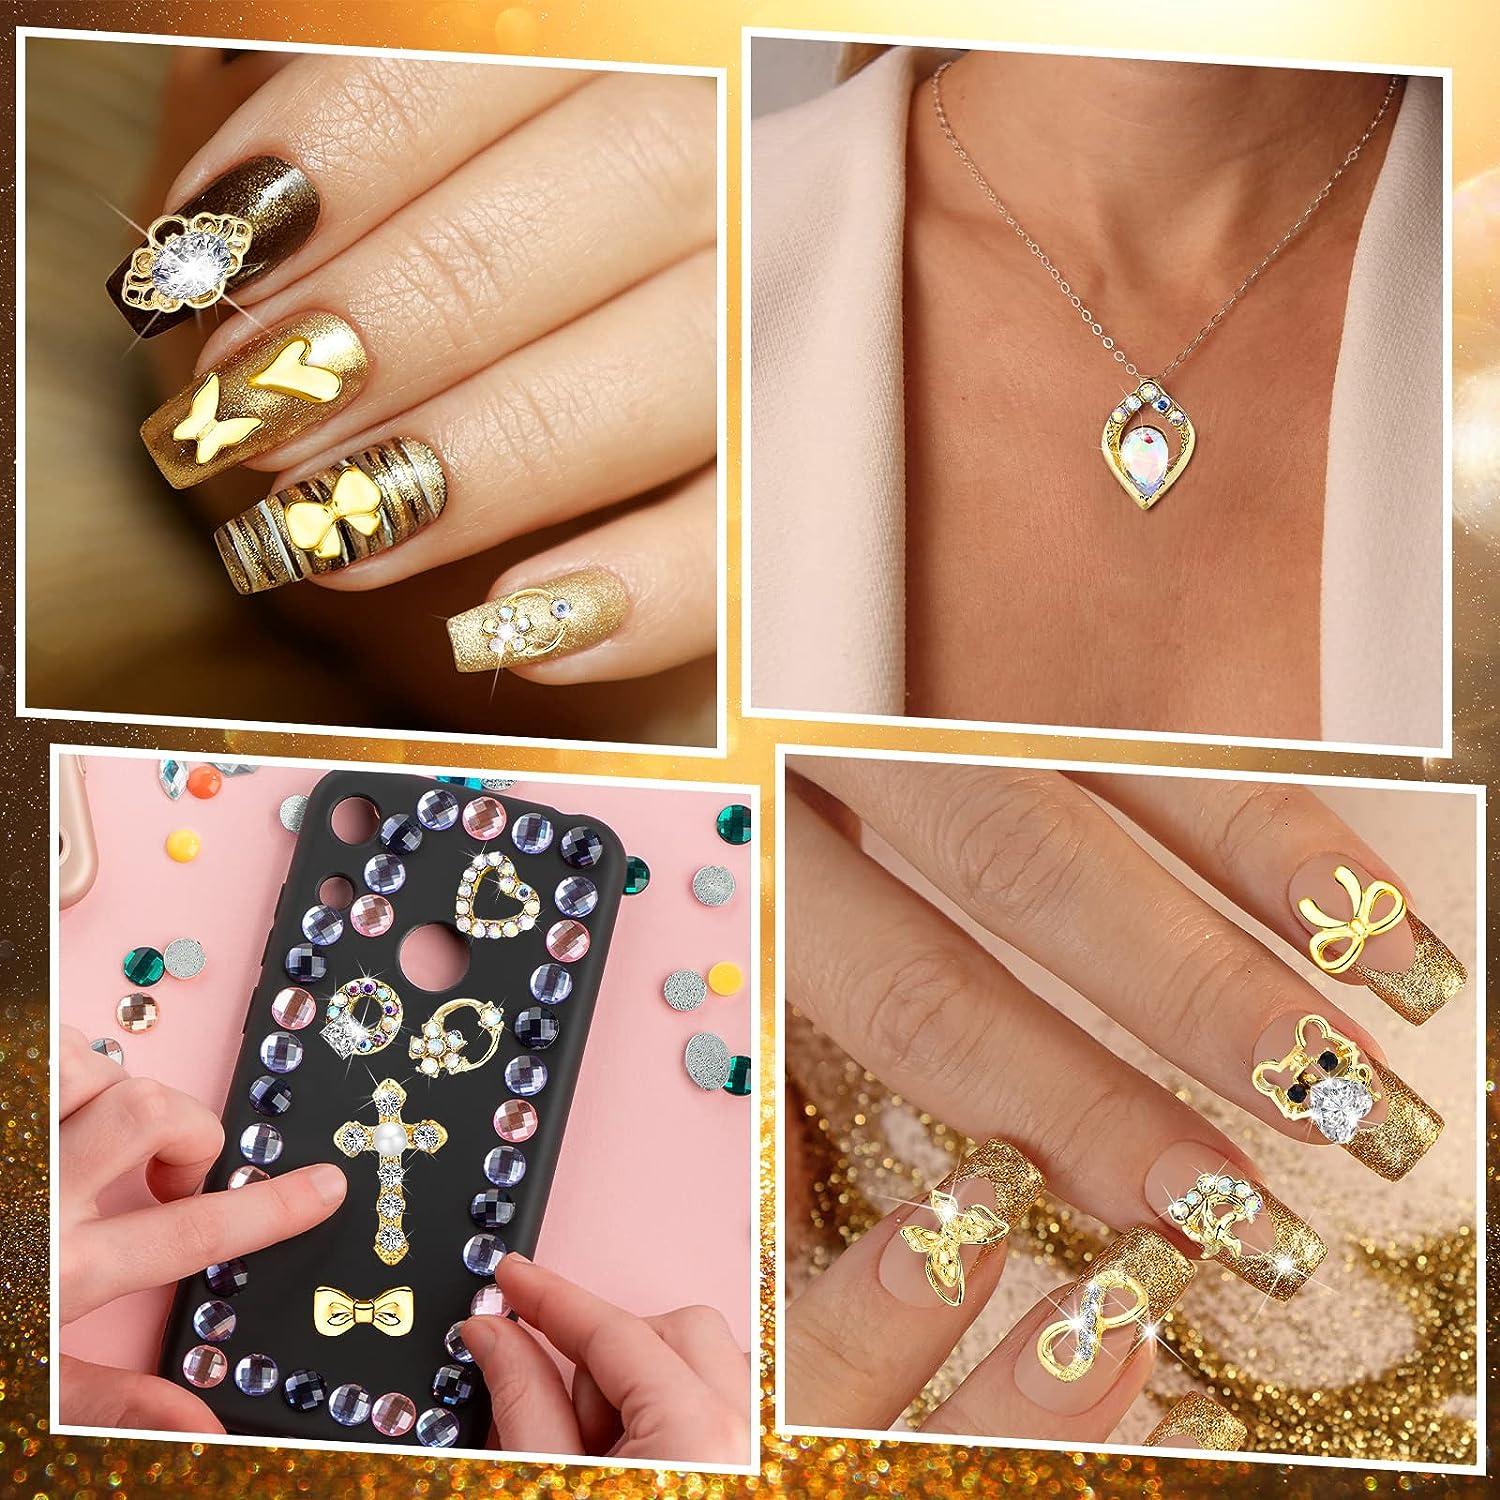 Jewelry Crystal Shapes Nails, Stone Gold Charms Nail Art